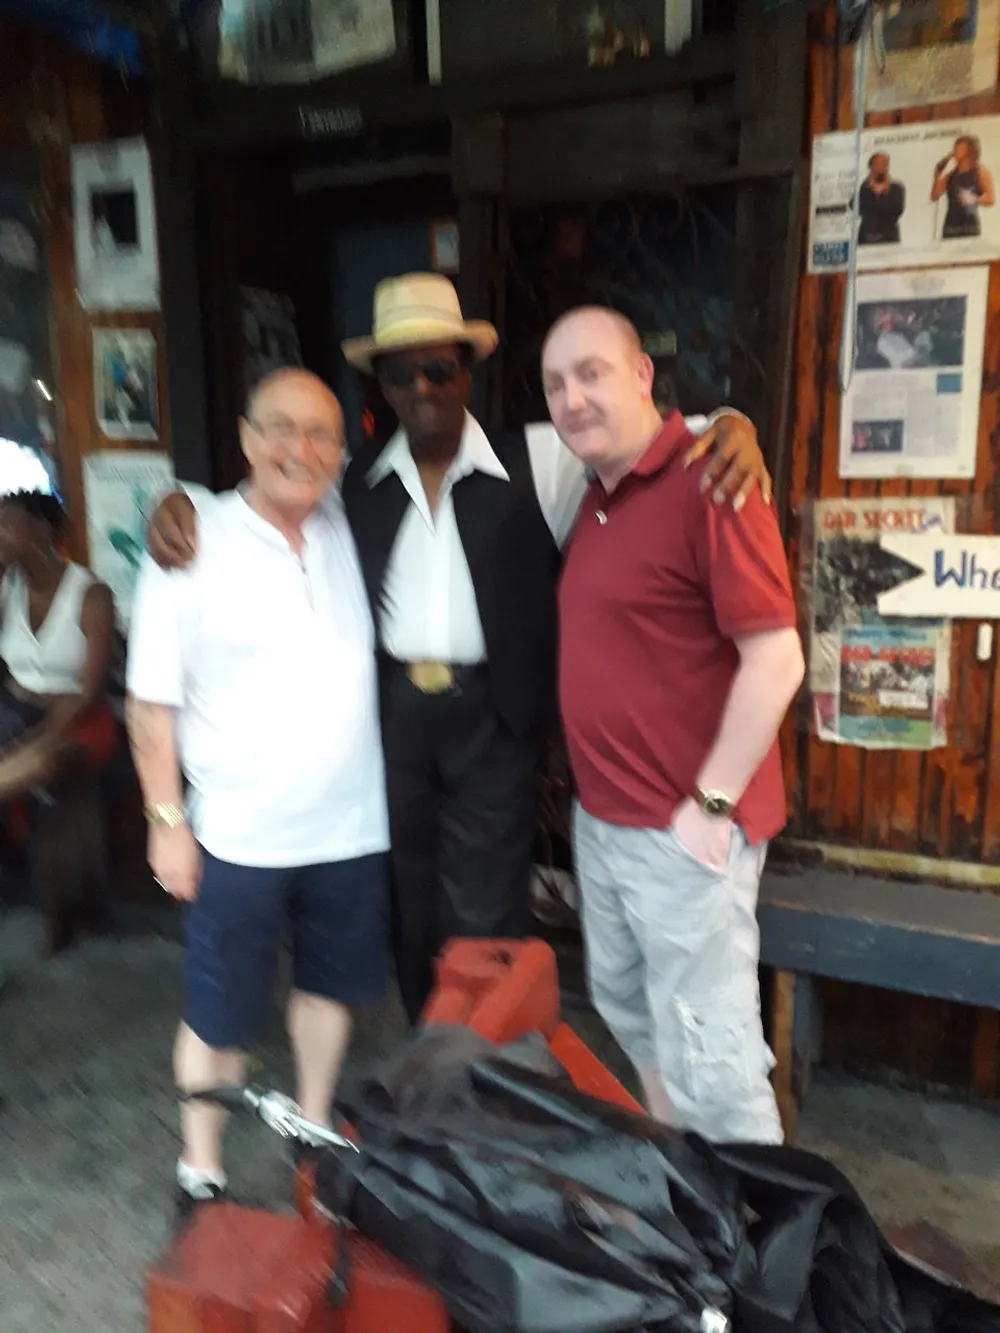 The image is a blurry photo of three men posing together two on the sides wearing casual clothes and another in the center with a hat and sunglasses in an environment that appears to be a bar or music club evidenced by posters and dark interior